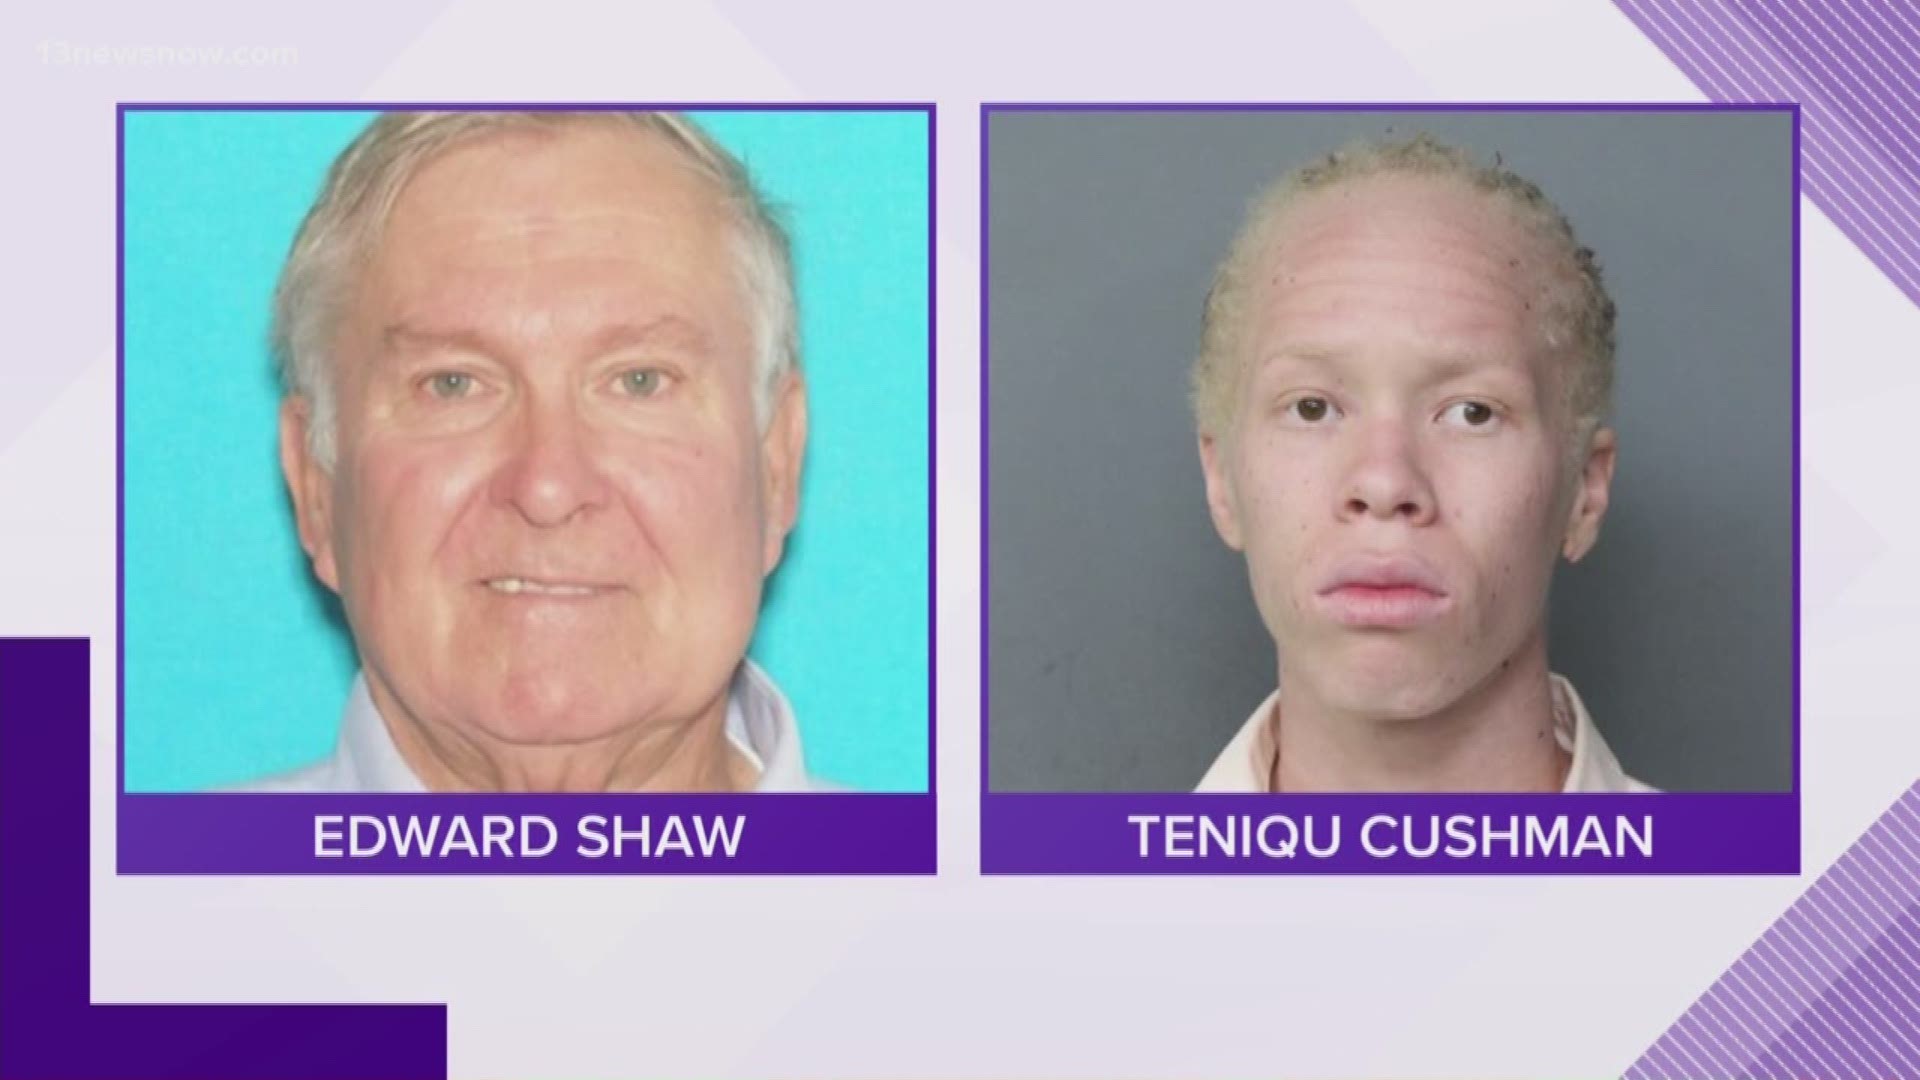 The trial for Edward Shaw, who was charged with killing a Norfolk school teacher, will start on October 18. 13News Now Meghan Puryear has more details.